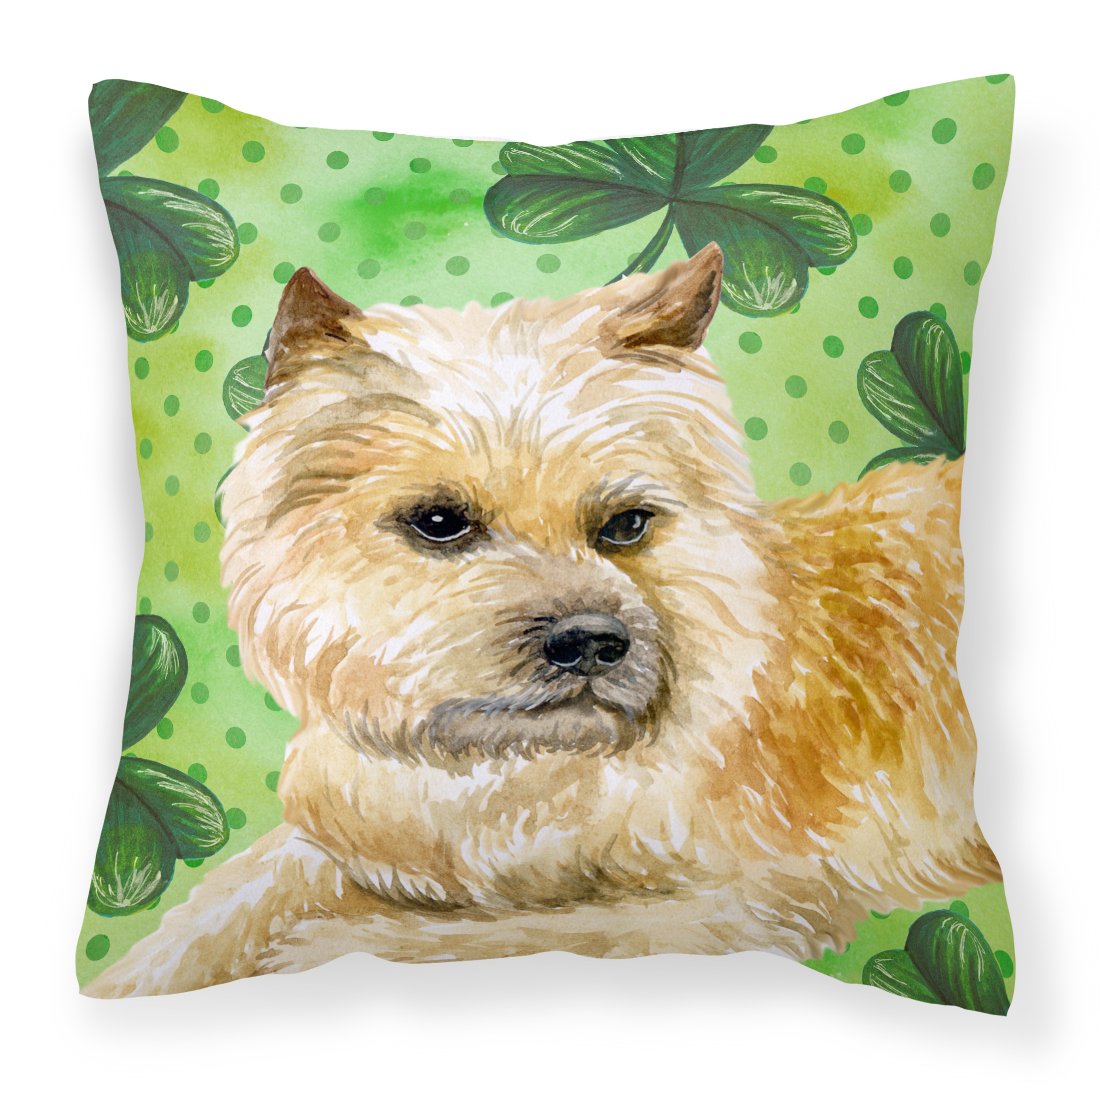 Cairn Terrier St Patrick's Fabric Decorative Pillow BB9864PW1818 by Caroline's Treasures